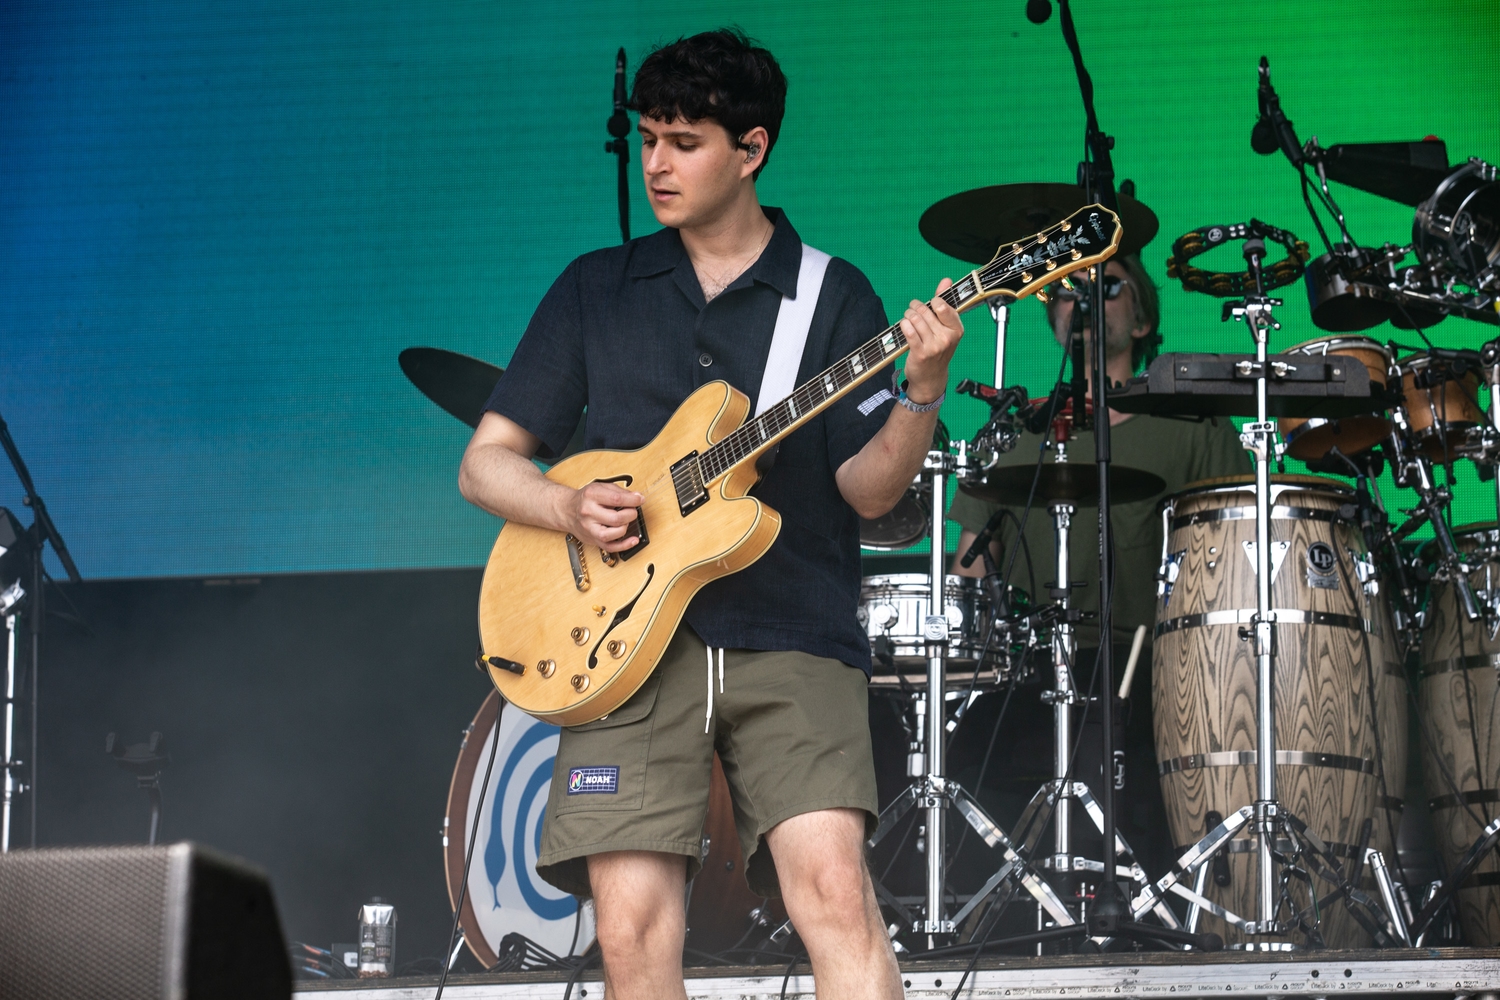 Vampire Weekend pop up at The Park stage for a surprise Glastonbury breakfast gig